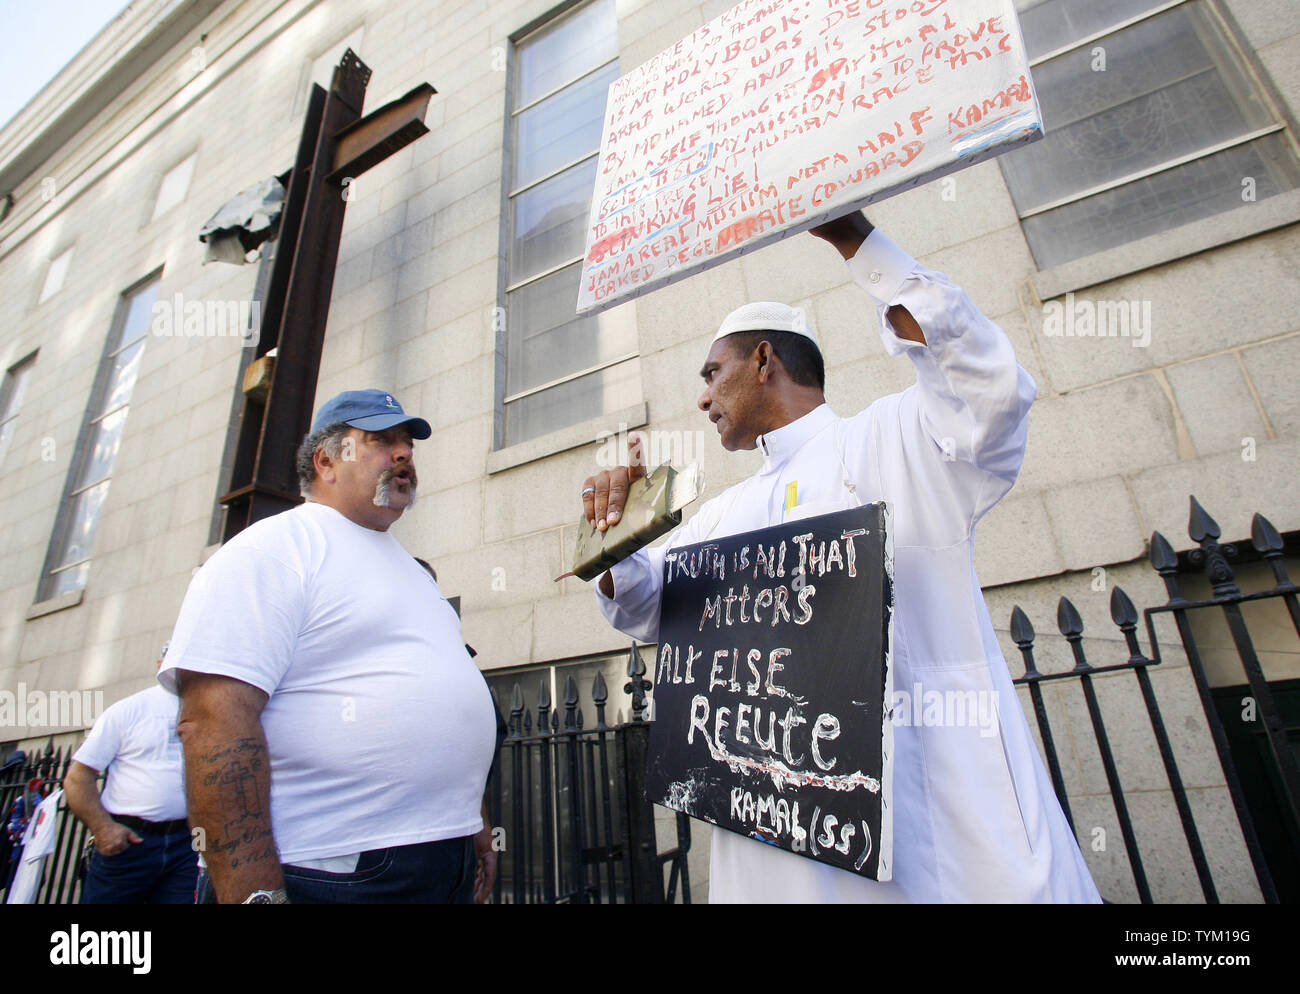 Frank Silecchai (L) of Rock Hill, SC, and Kamal Ramdass, of New York, who  is Muslim, both discuss their opposition to the "Ground Zero" mosque on  September 11, 2010 in New York